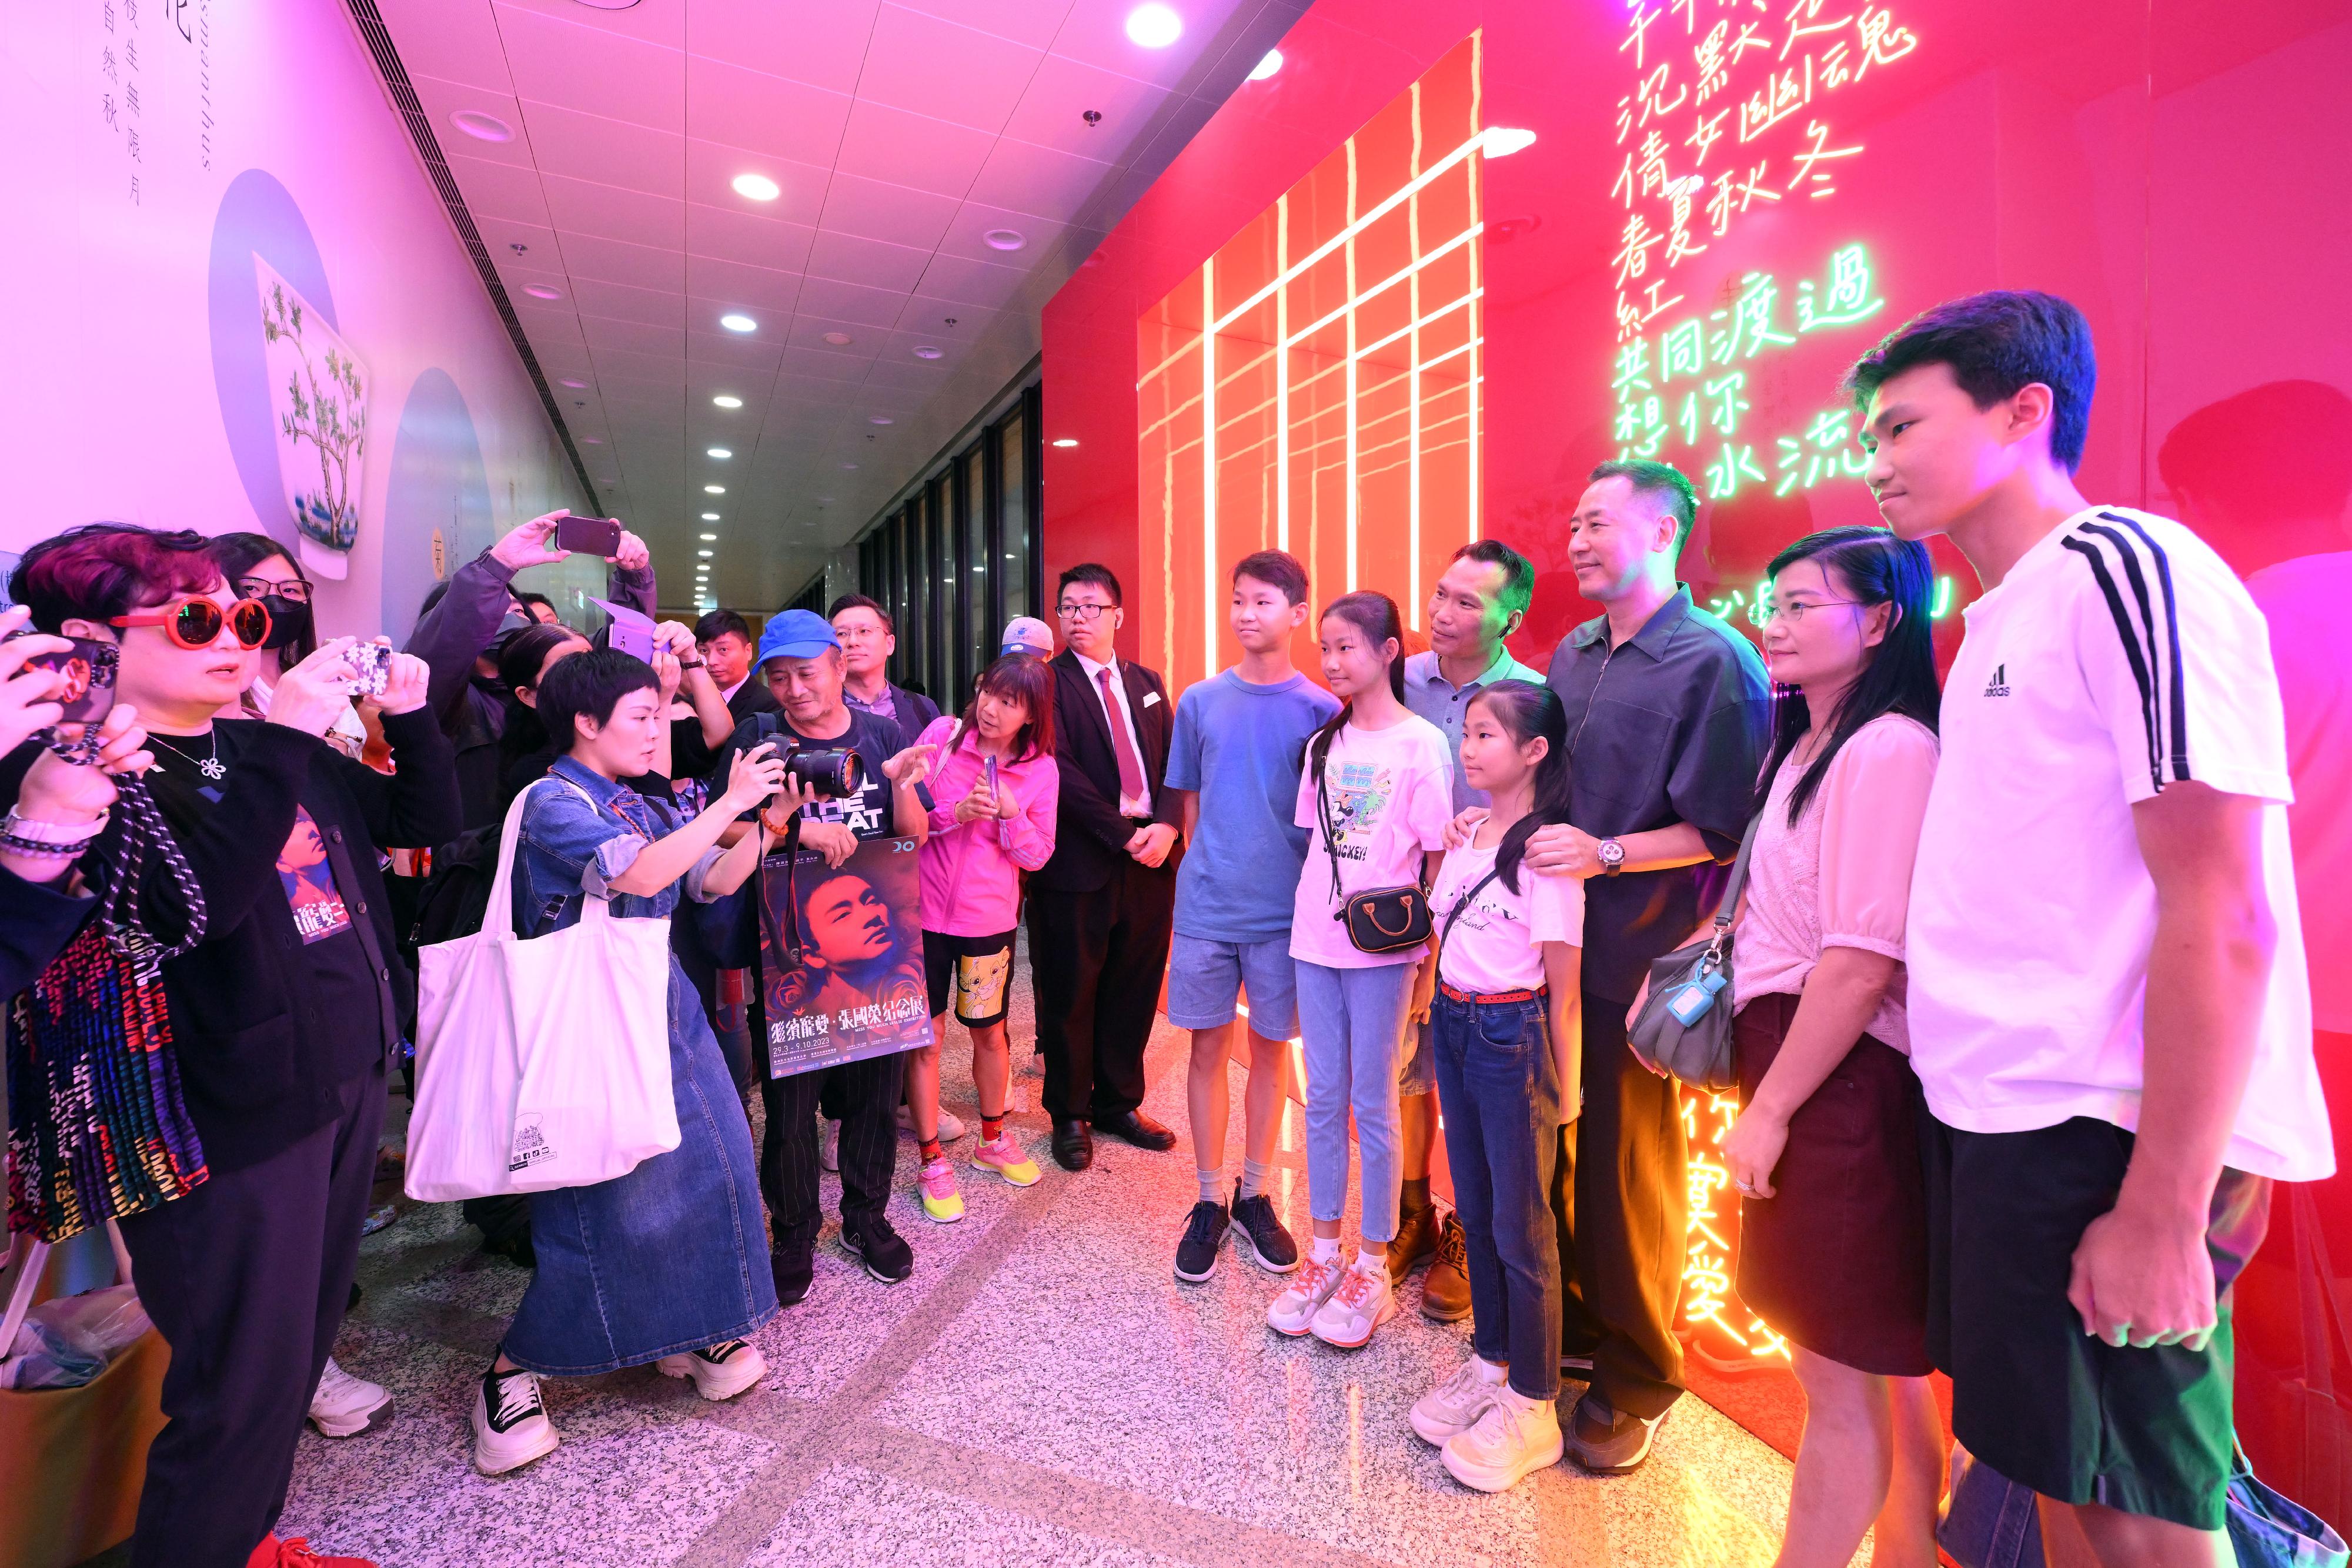 The "Miss You Much Leslie Exhibition" held at the Hong Kong Heritage Museum came to an end yesterday (October 9). The six-month long exhibition received a total of over 370 000 visitors.